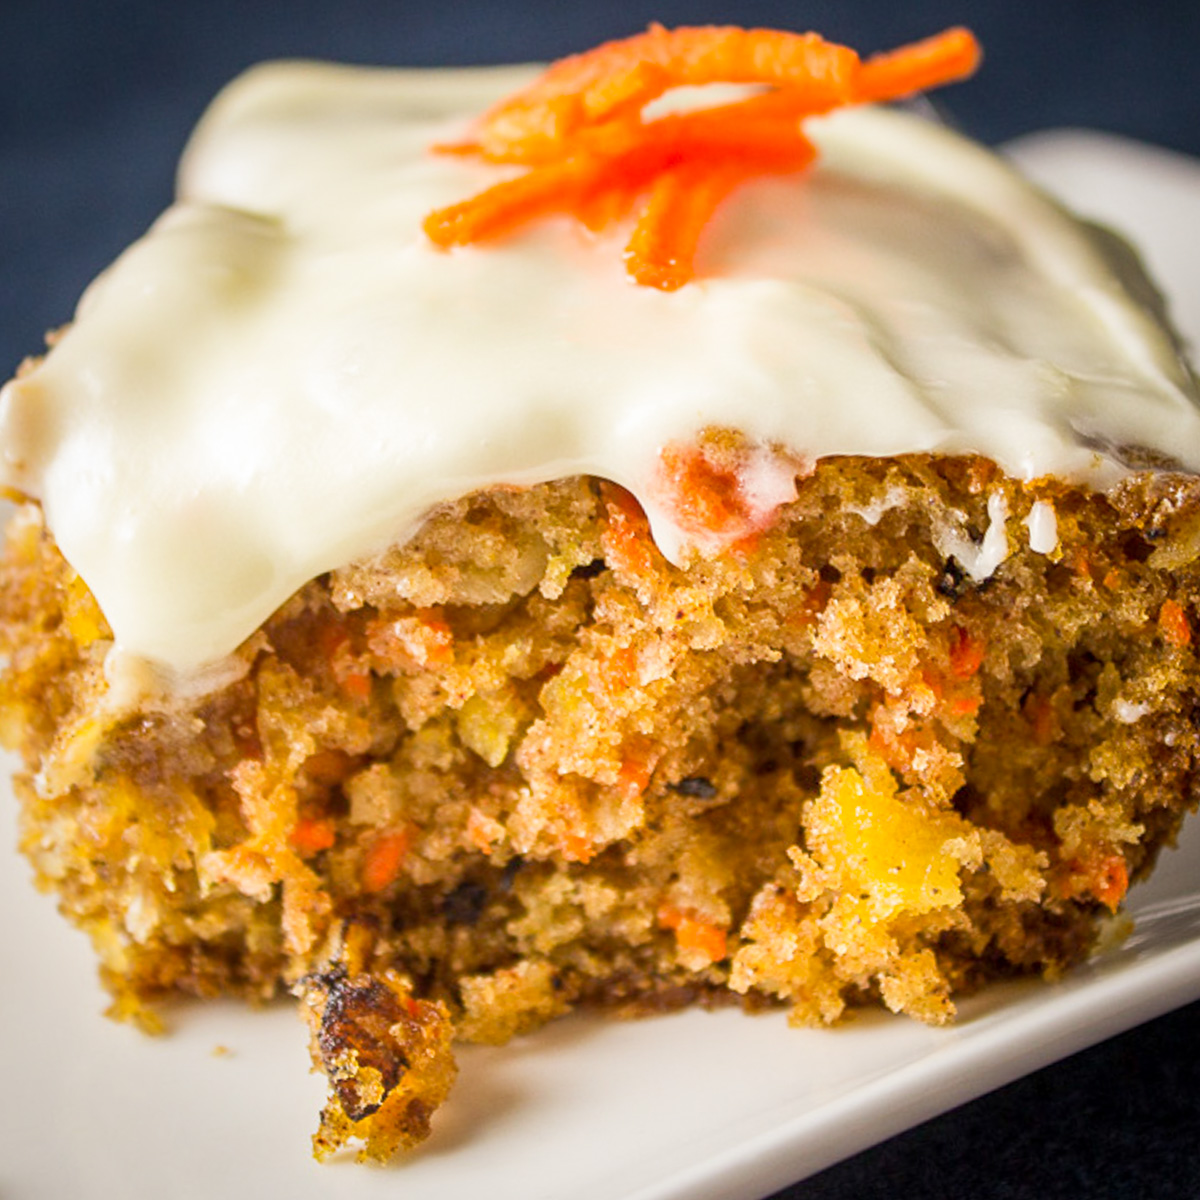 Old Fashioned Carrot Cake Recipe with Pineapple